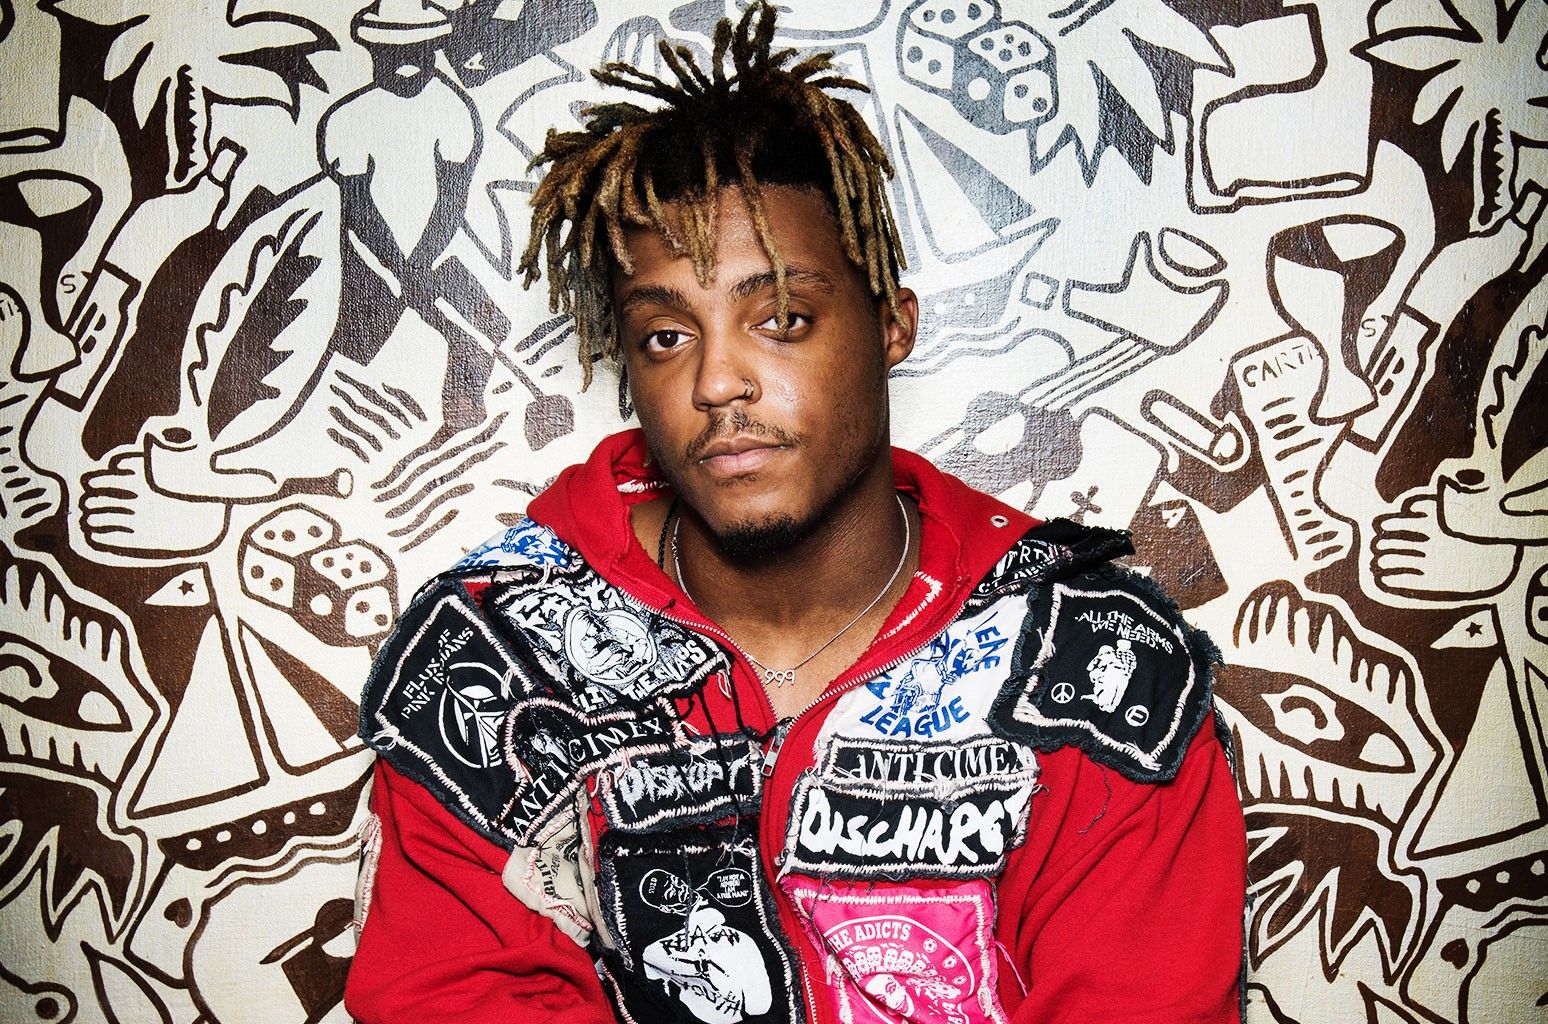 RIP Juice WRLD: Drake, Chance The Rapper and More React to